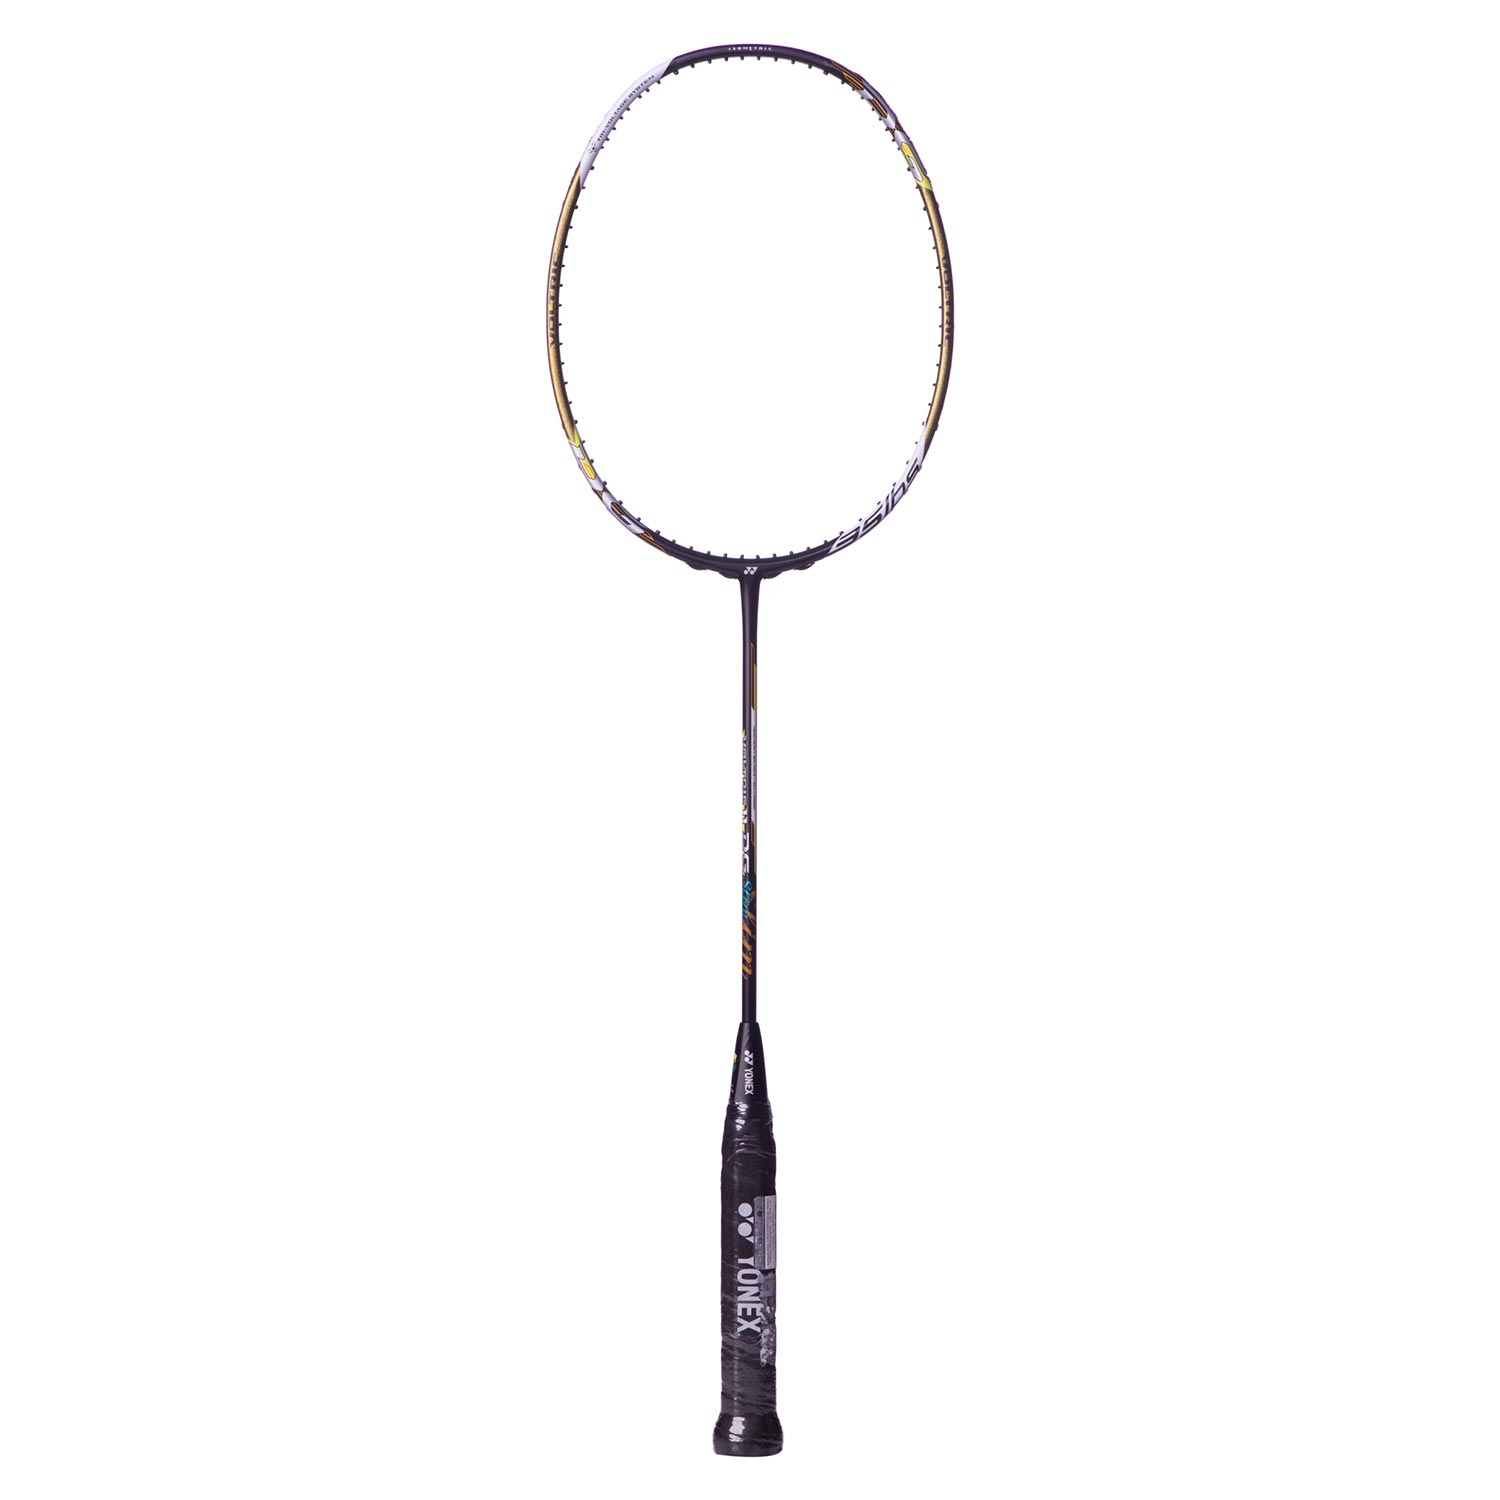 The Complete Guide To Yonex Badminton Rackets: Voltric Series 